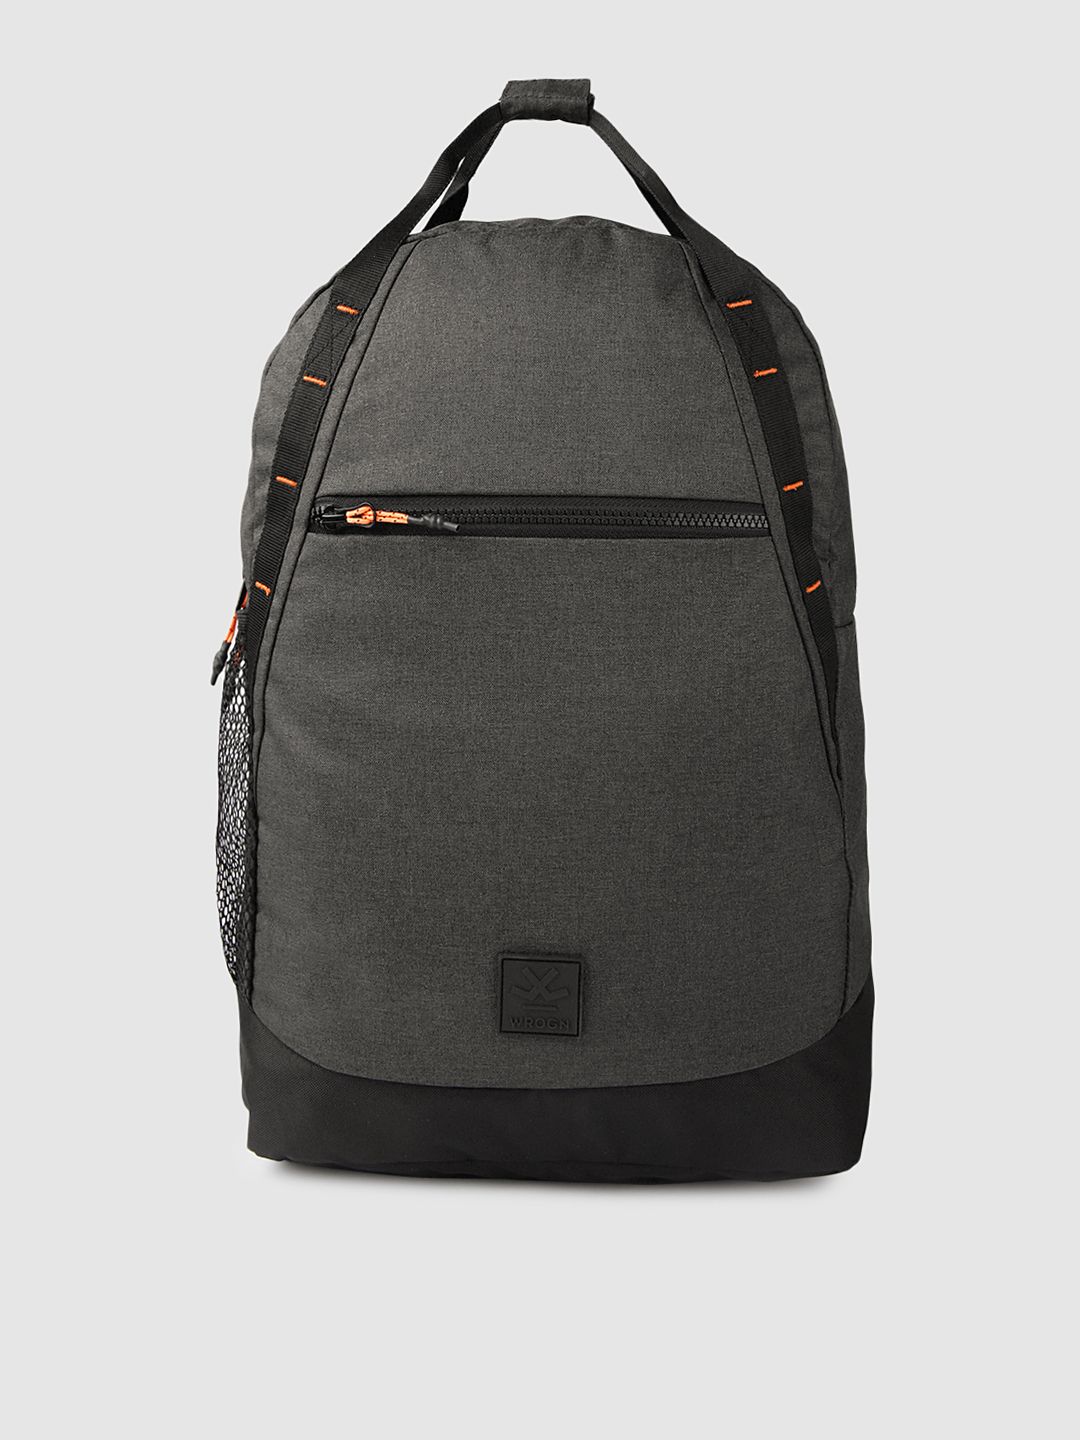 WROGN Unisex Charcoal Black Solid Hanger Backpack Price in India